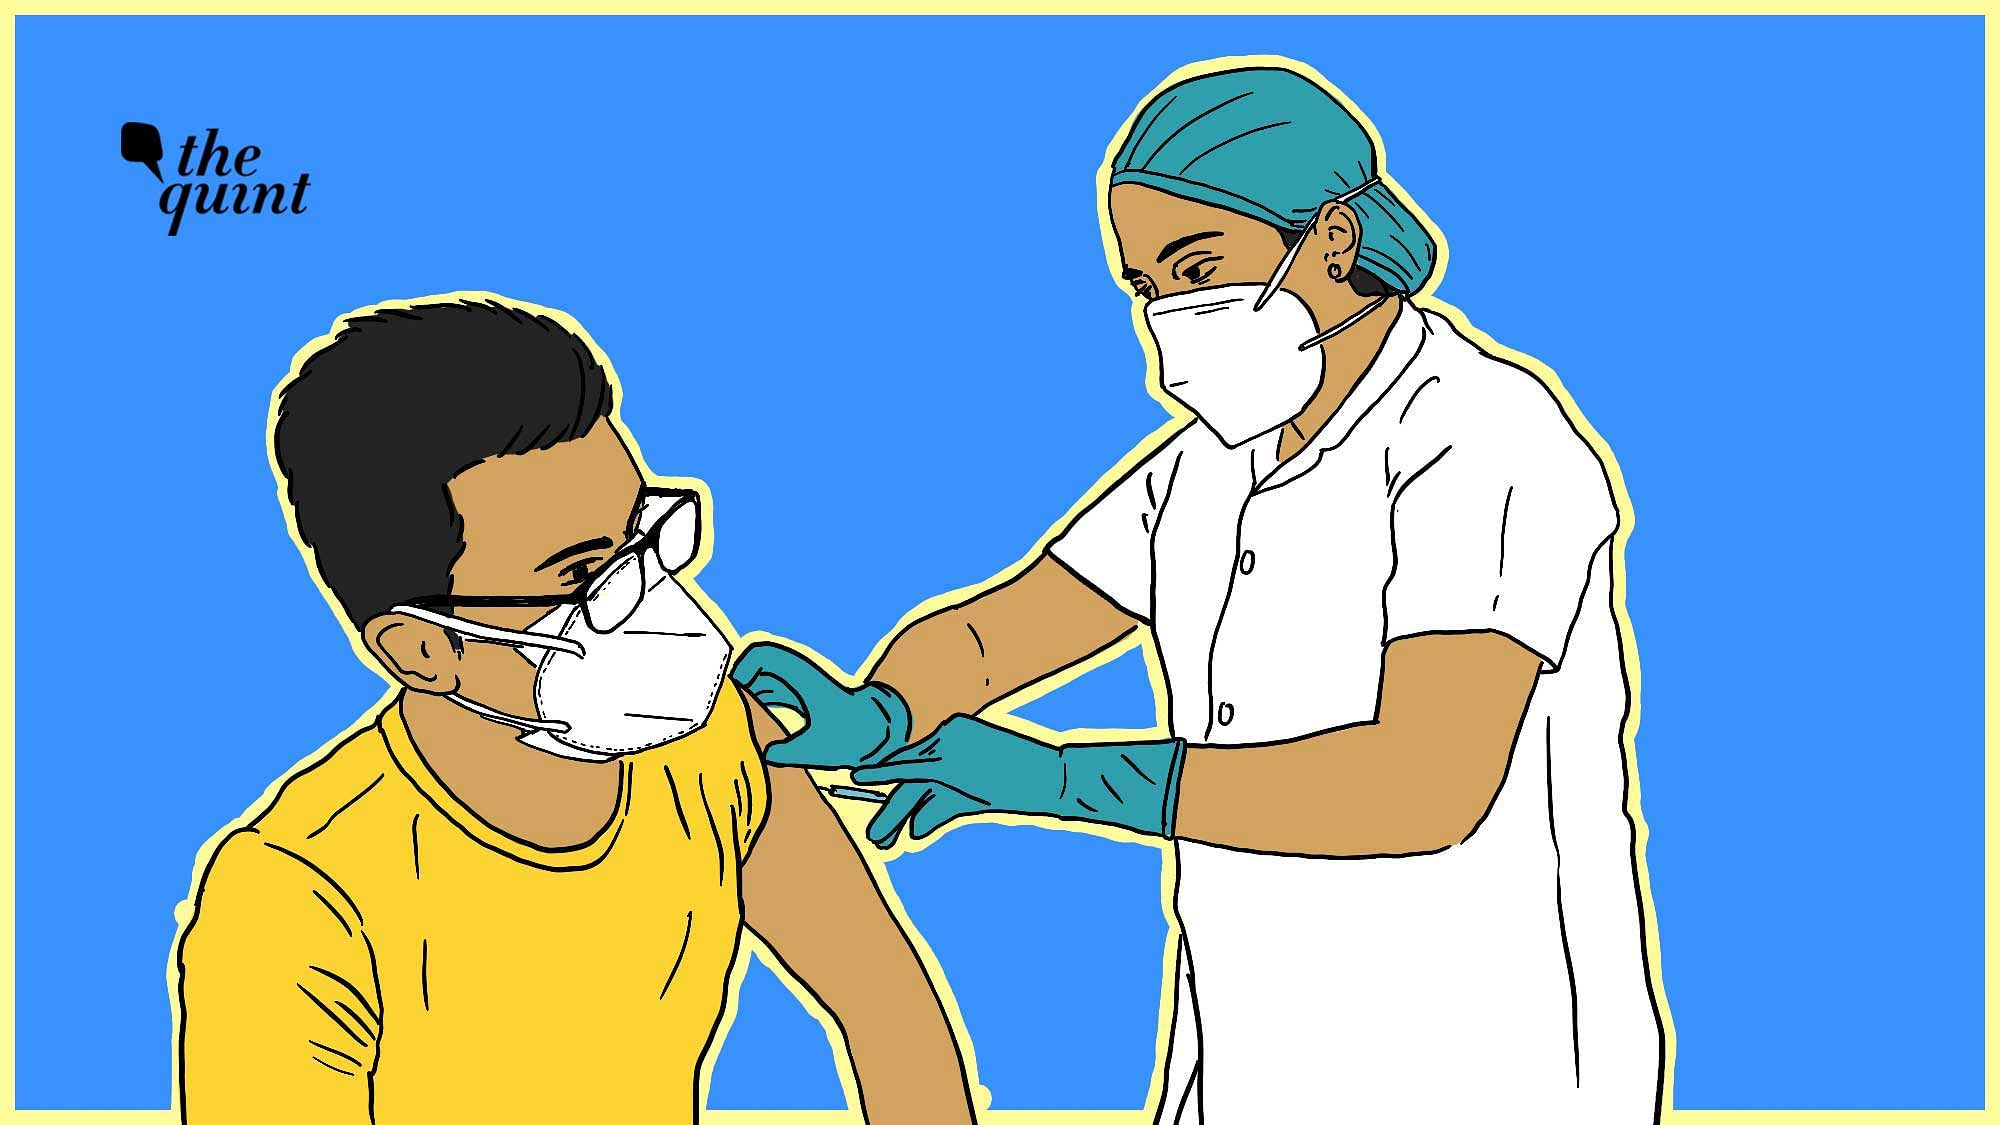 From registering for the vaccine to getting the jab, here’s what I experienced in Noida.